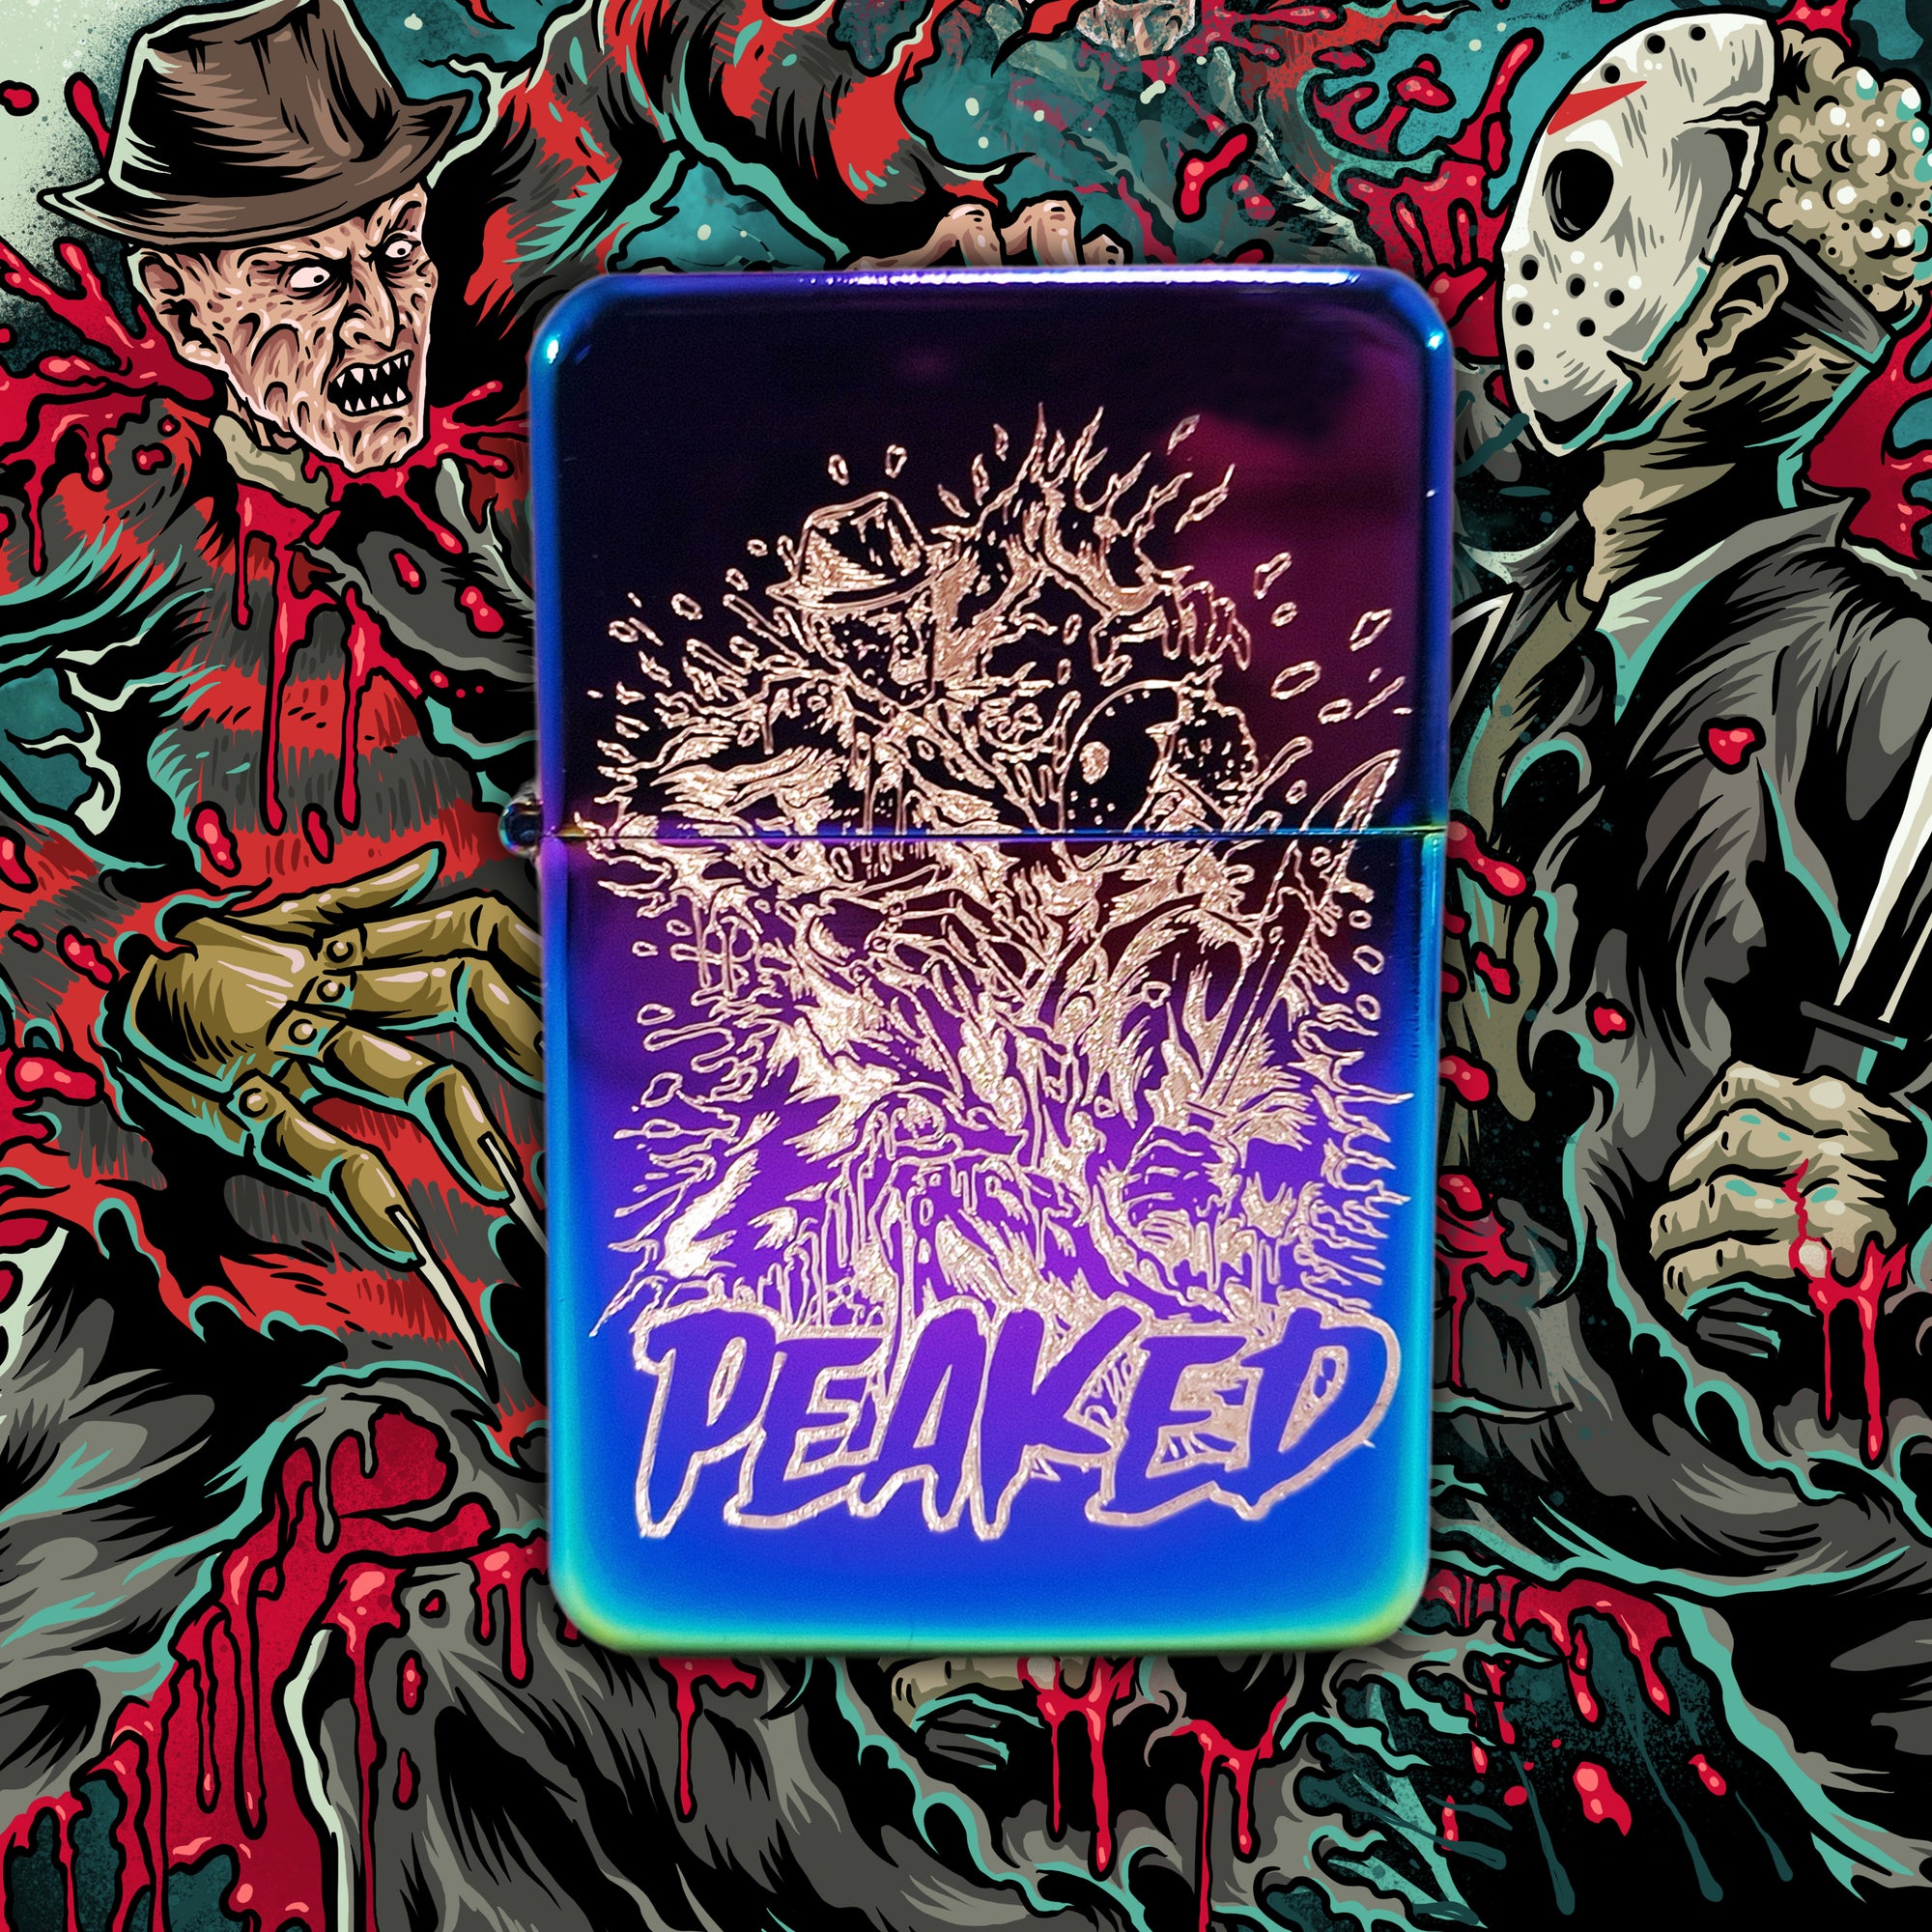 Limited Edition Freddy VS Jason lighter (Only 100 made)